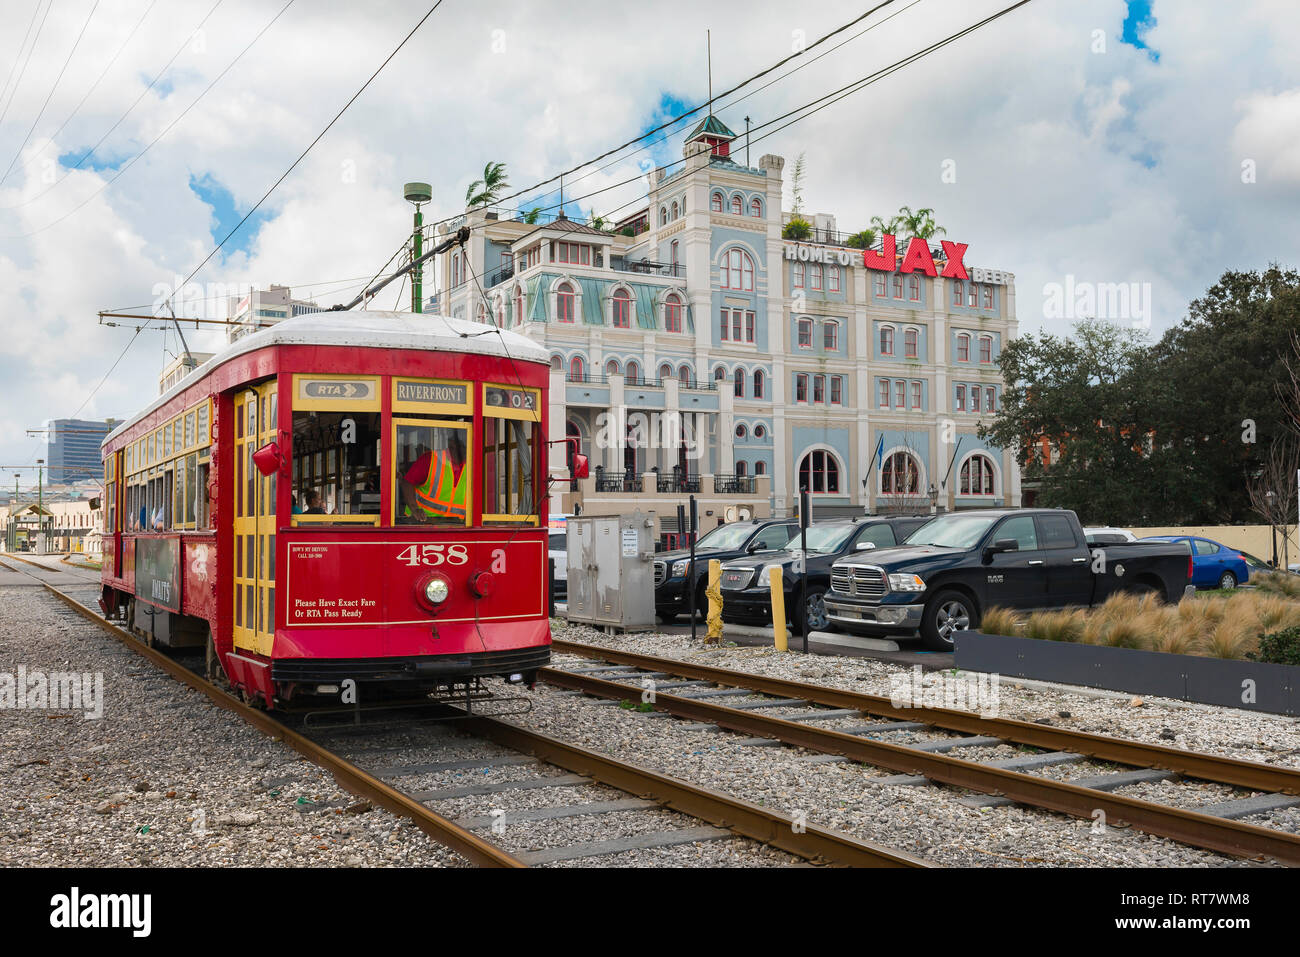 New Orleans streetcar, view of a New Orleans streetcar passing the Jax Brewery building in the Riverfront district of the city, Louisiana, USA. Stock Photo